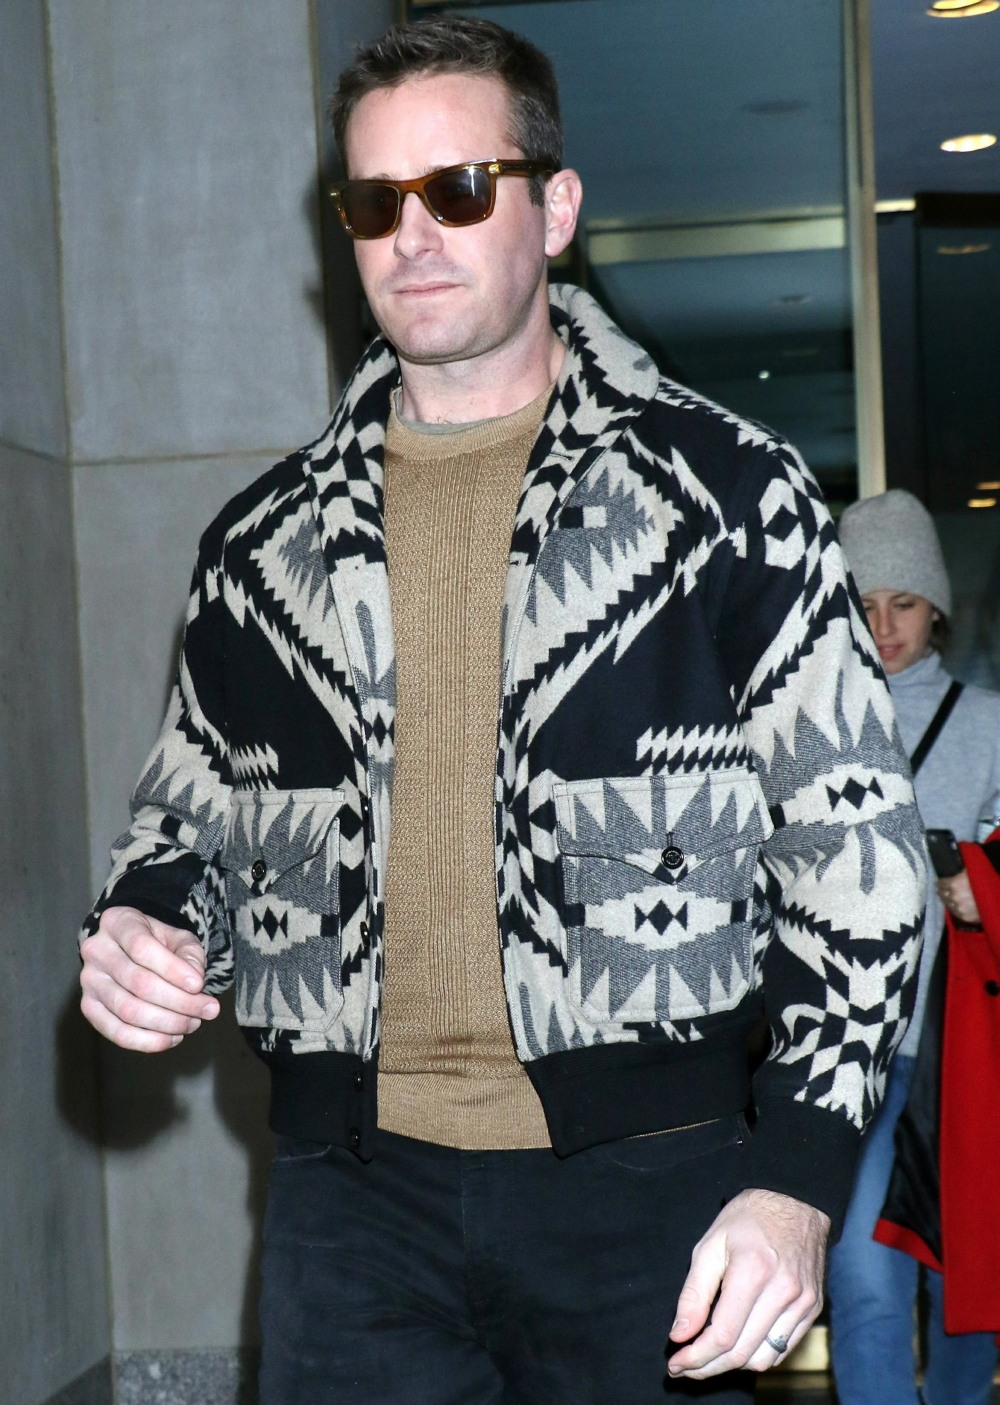 Armie Hammer is seen exiting NBC's Today Show